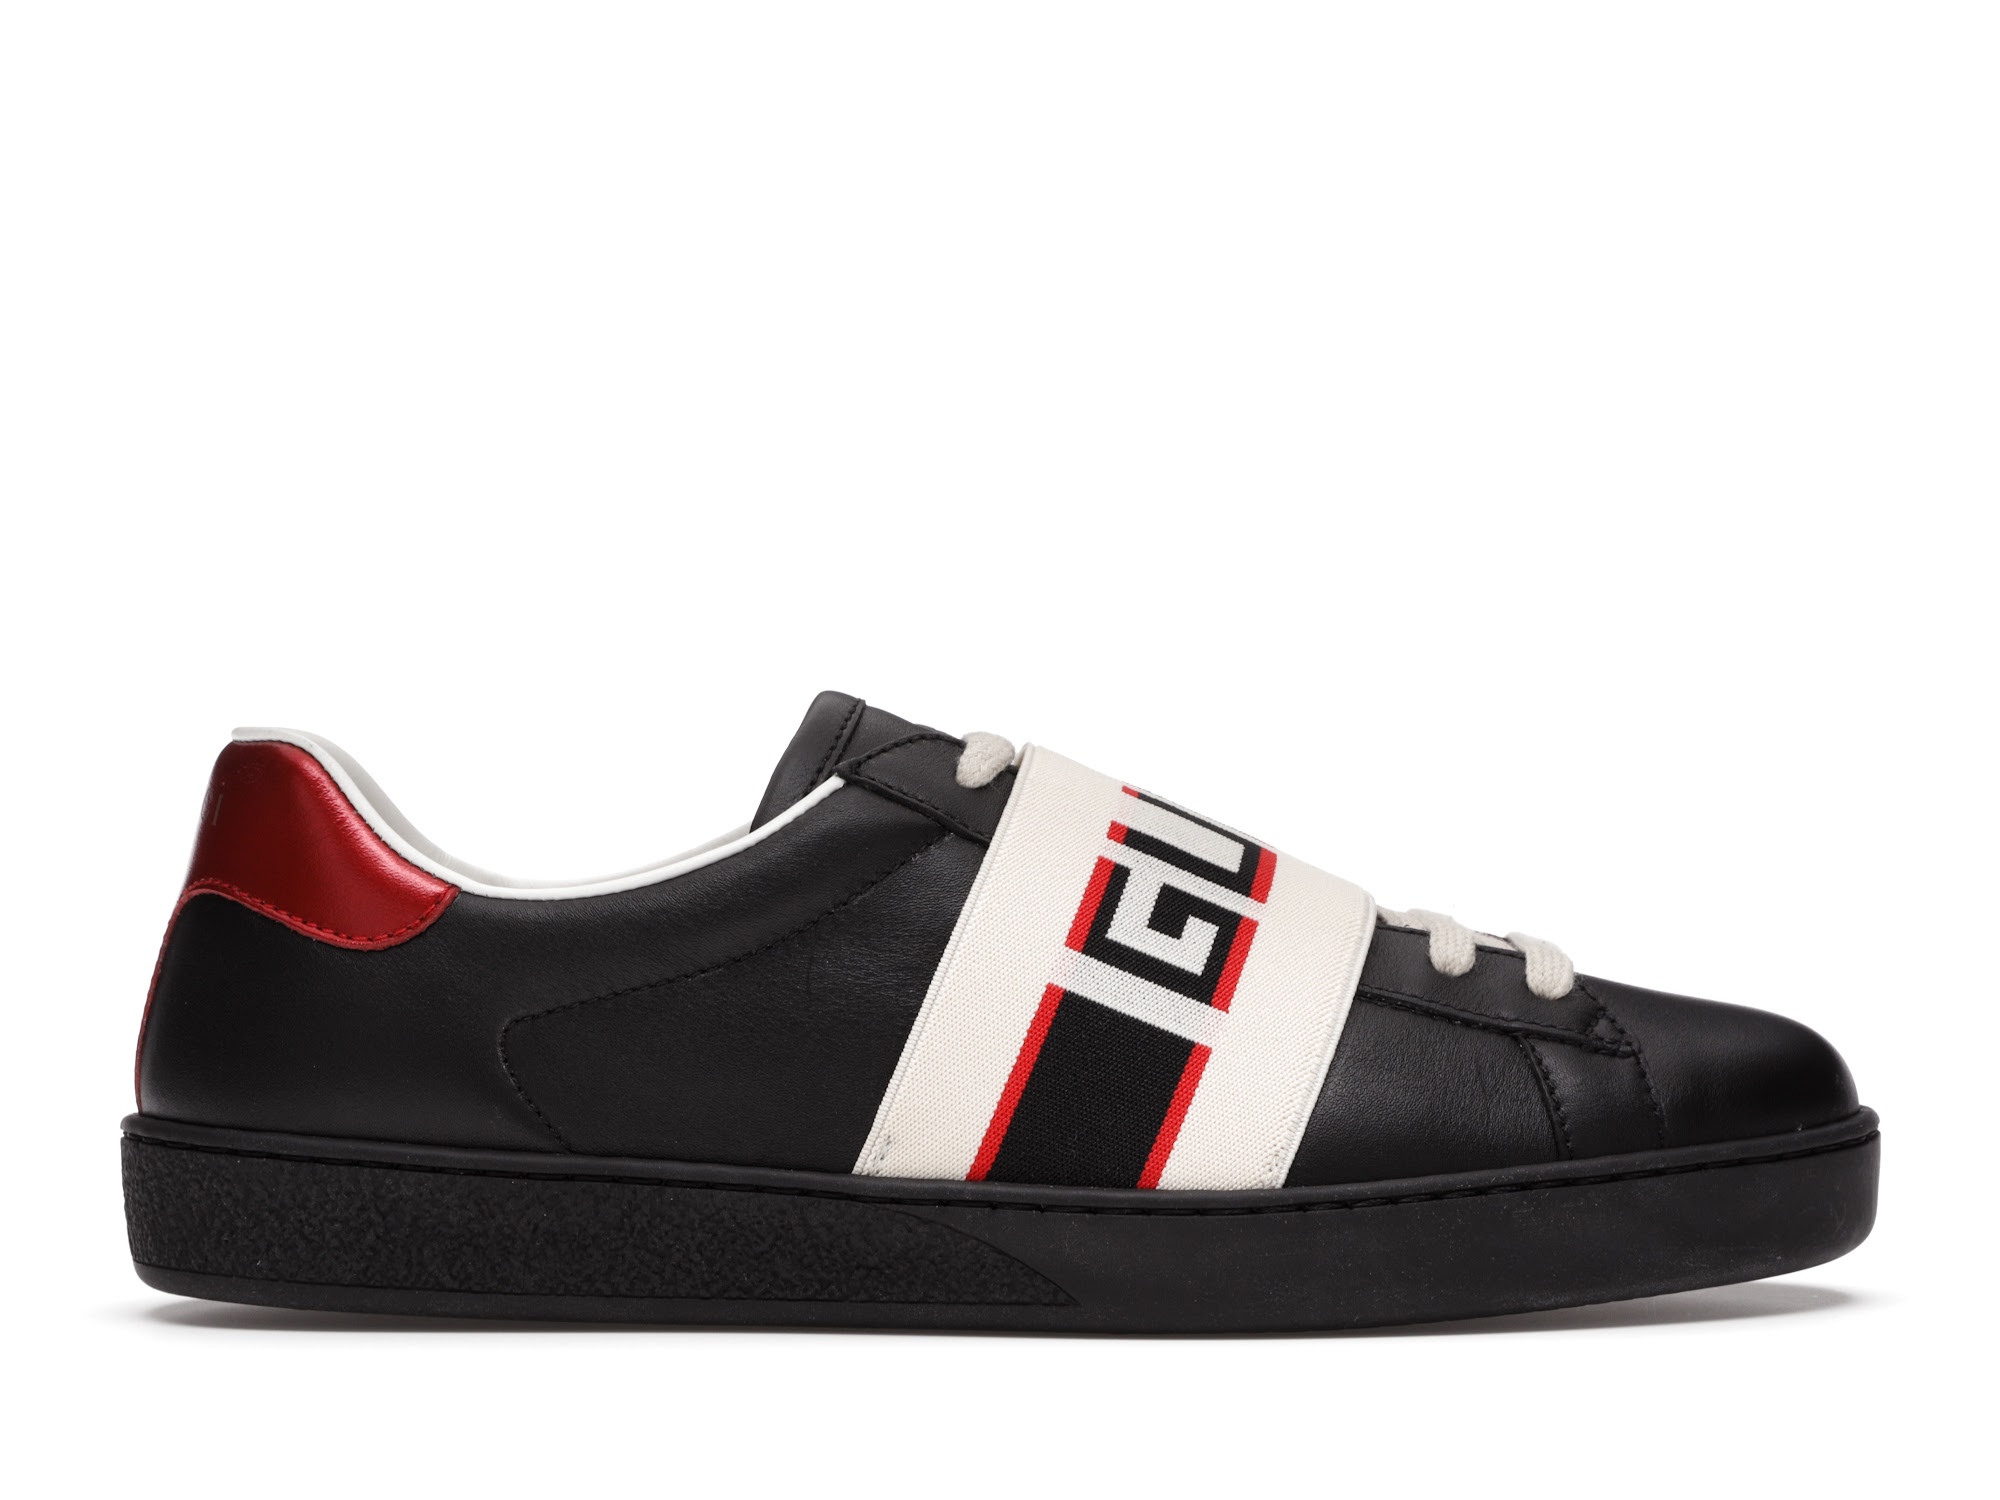 GUCCI Ace webbing-trimmed leather sneakers | NET-A-PORTER